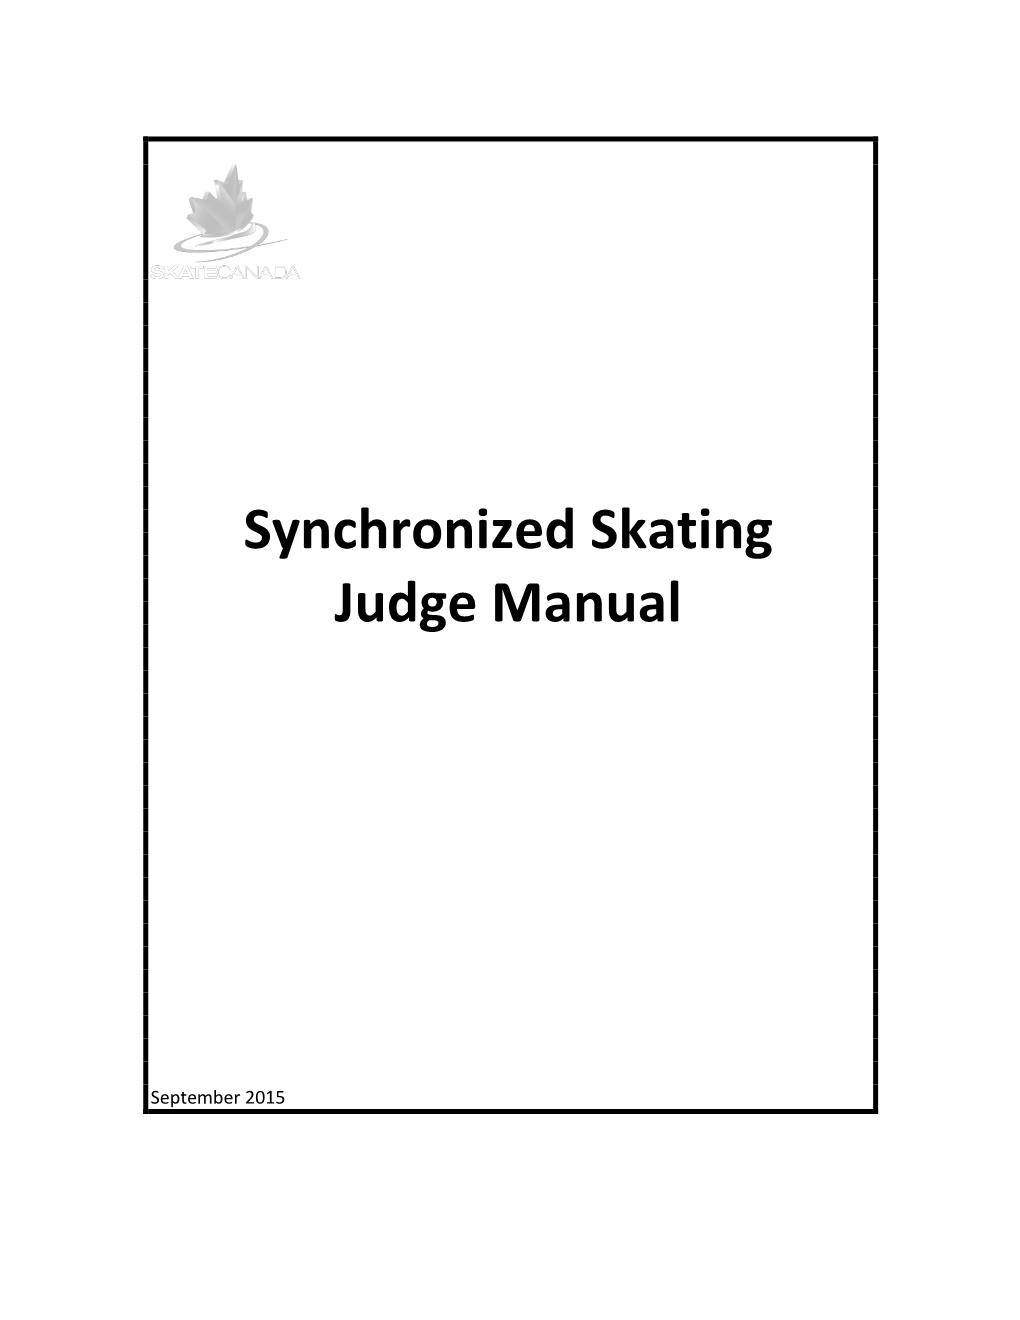 Synchronized Skating Judge Manual Is Designed to Present to You Some of the Important Things to Know As You Begin Judging at All Levels